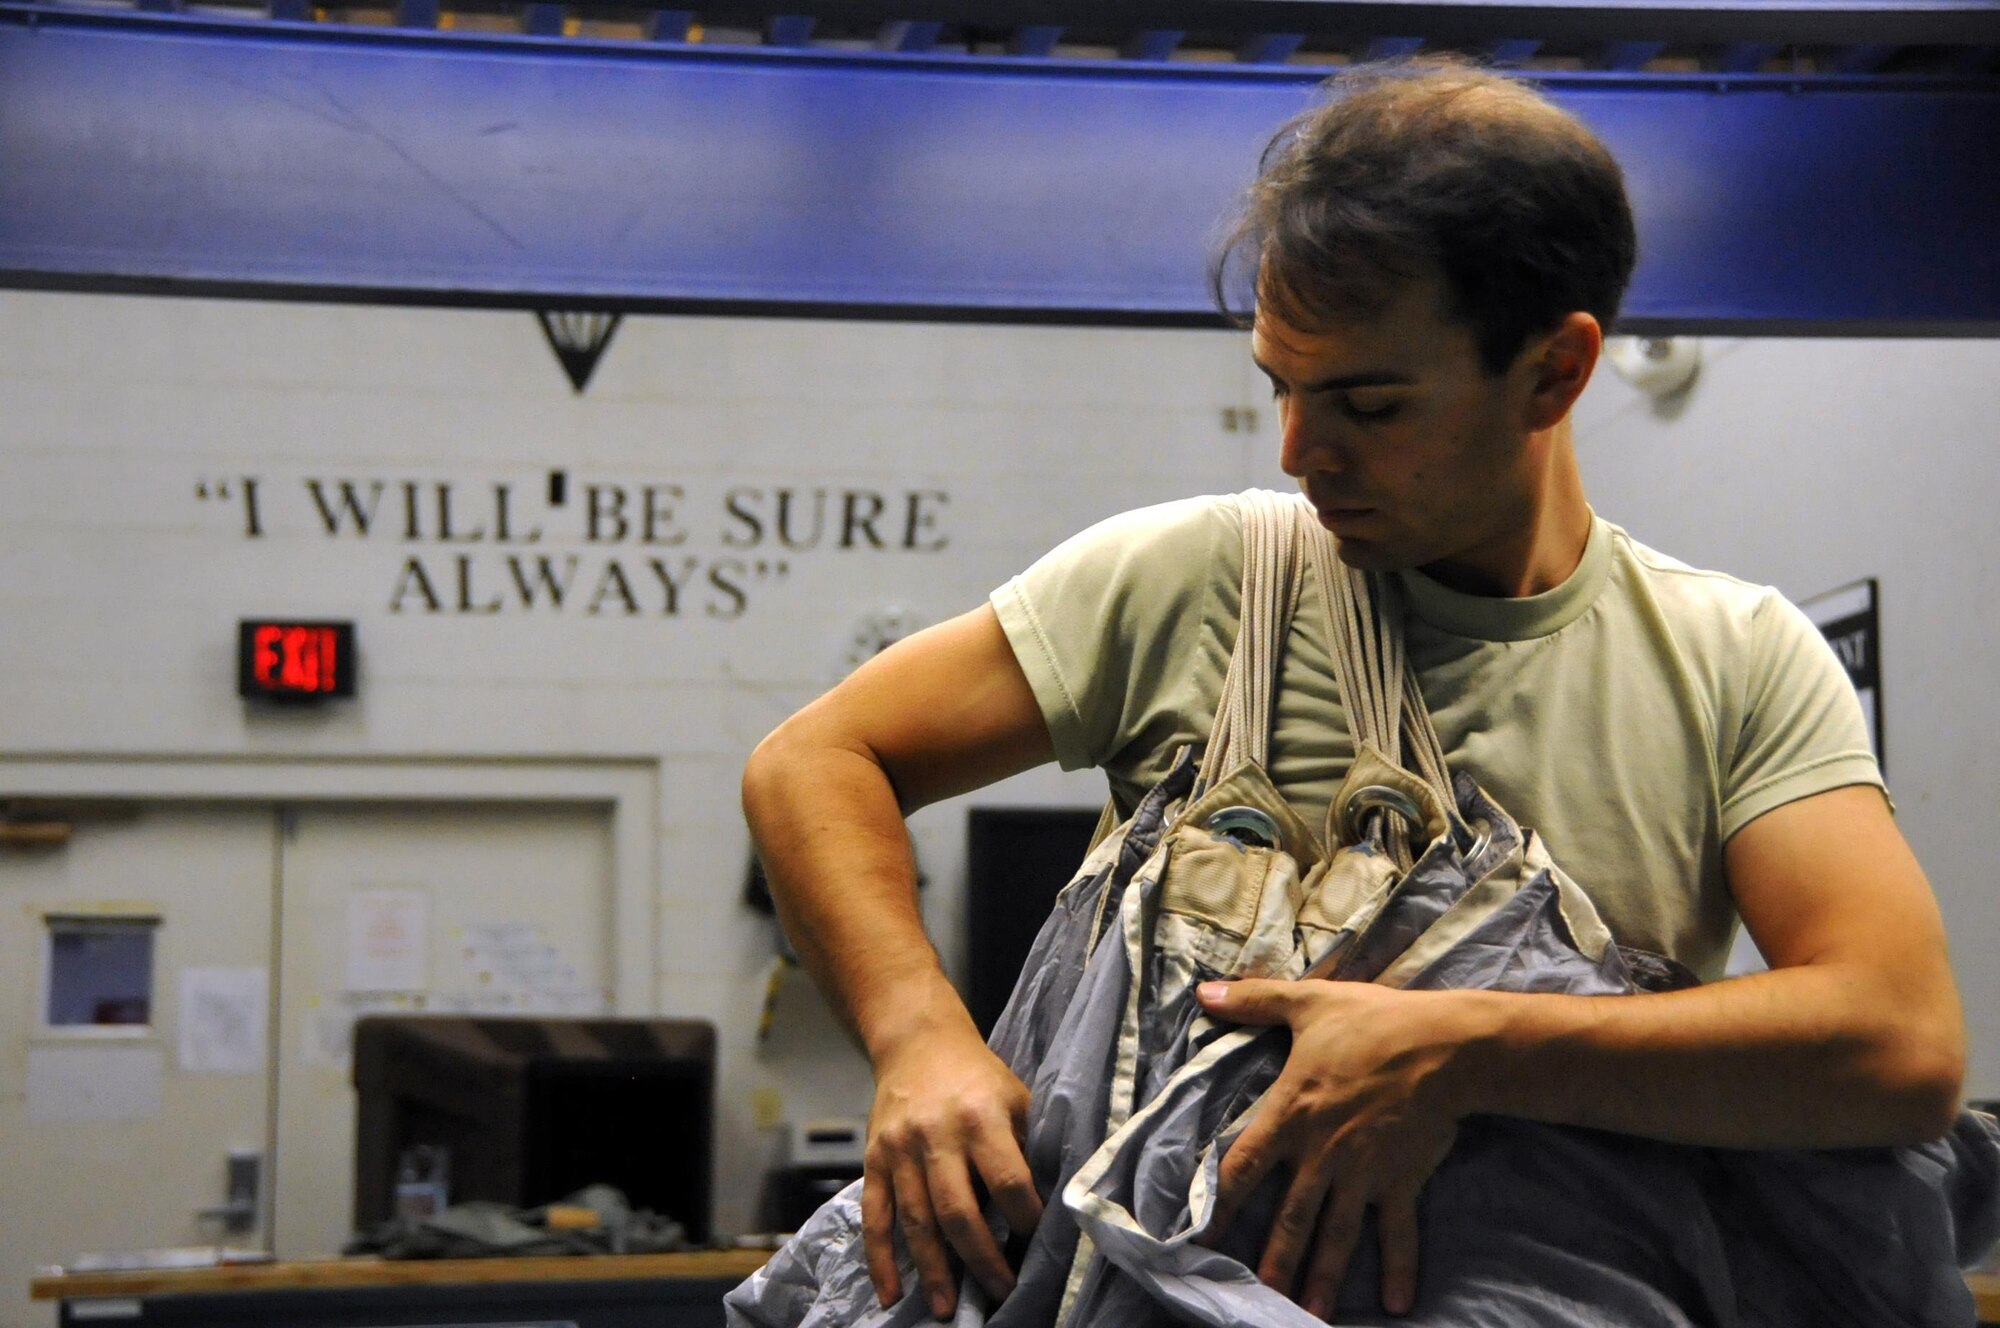 Tech. Sgt. Isaac Shapiro packs a parachute at the 306th Rescue Squadron, Davis-Monthan Air Force Base, Ariz., July 14. He's an Air Force Reserve aircrew flight equipment specialist for the Guardian Angel squadron here, which is part of the 943rd Rescue Group. Shapiro transitioned to the Reserve six years ago after six years of active duty service to expand his breadth of experience and be part of the unique combat-search-and-rescue mission. (U.S. Air Force photo by Carolyn Herrick) 